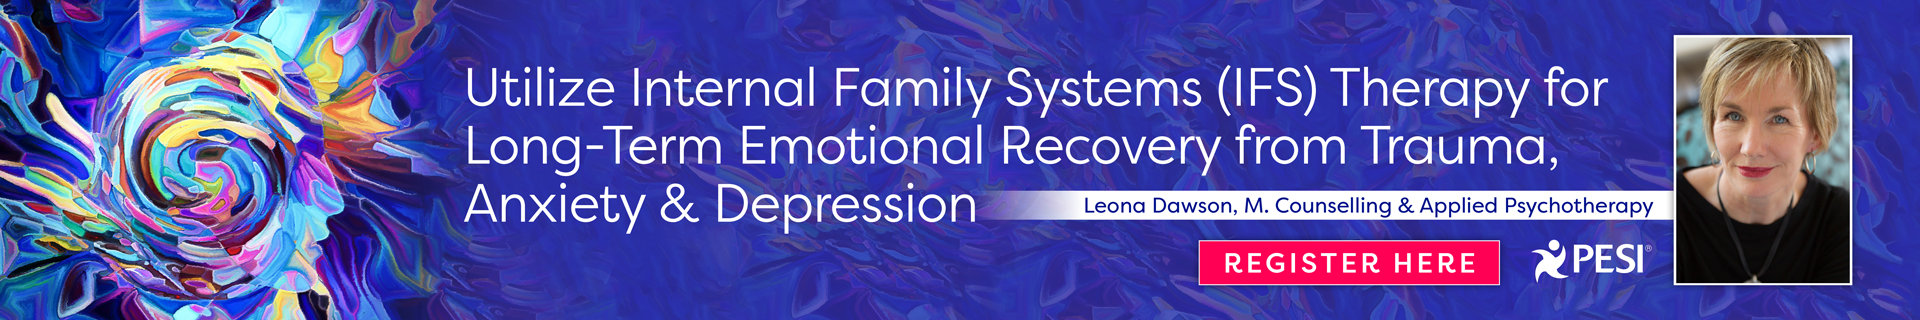 Internal Family Systems (IFS) for Long-Term Emotional Recovery from Trauma, Anxiety, Depression & Substance Abuse